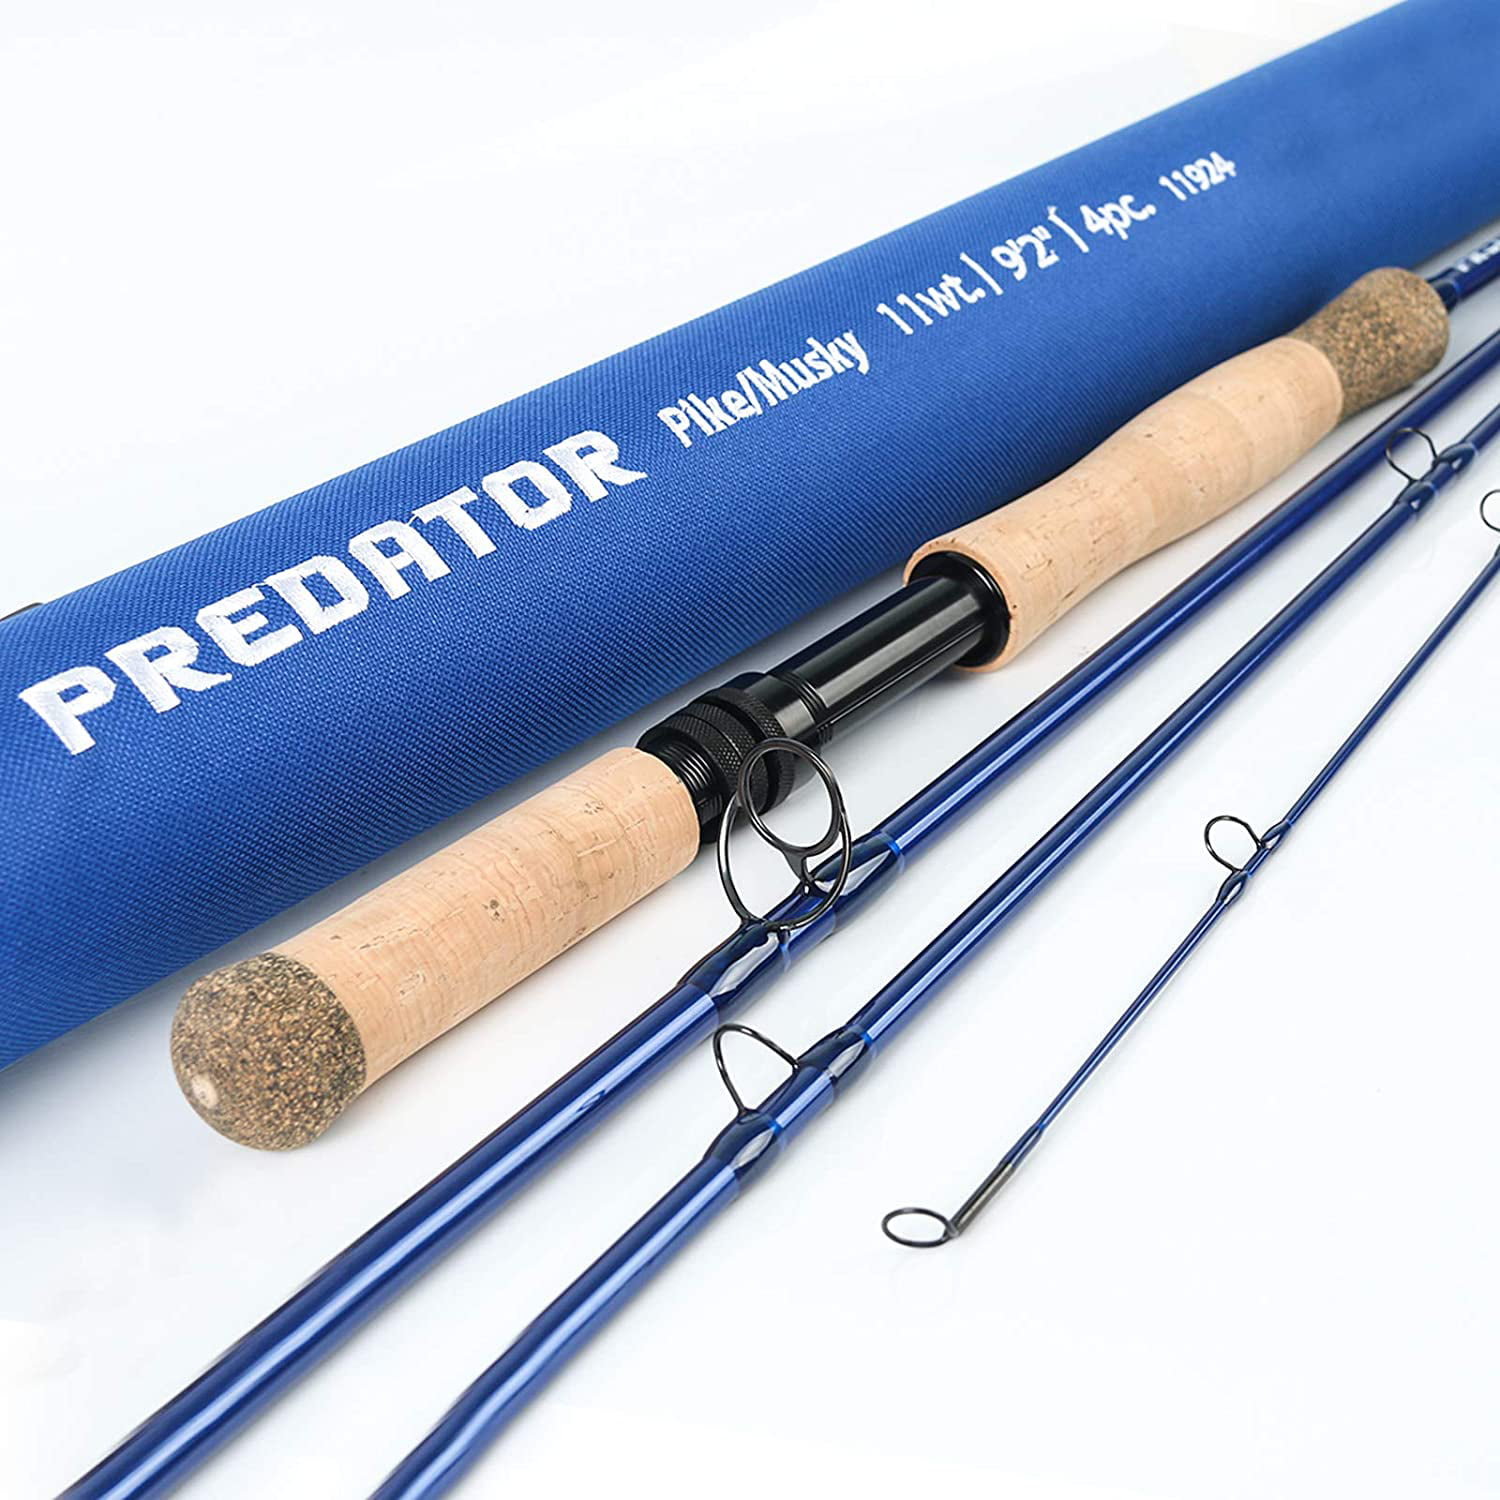 Maxcatch Travel Fly Fishing Combo 5/6 7/8Weight 7 Piece Fly Rod and Reel Outfit 